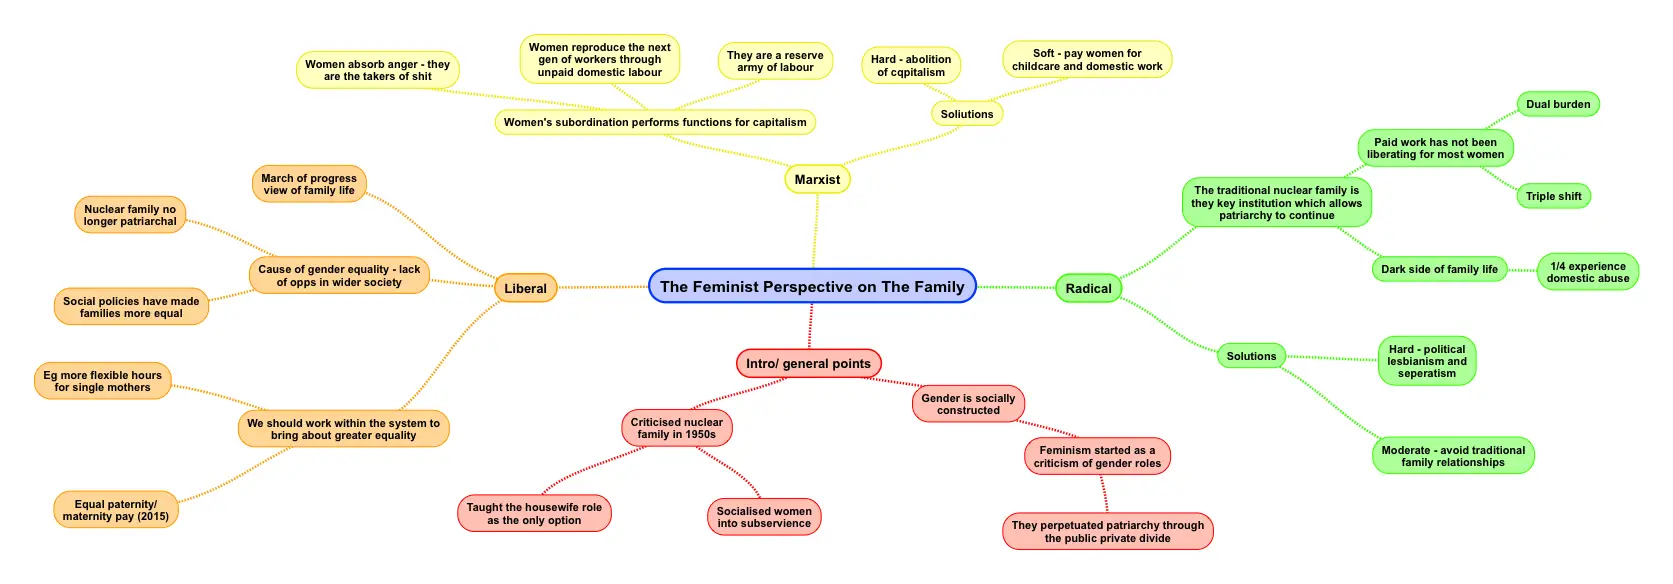 Feminist Perspectives on the Family